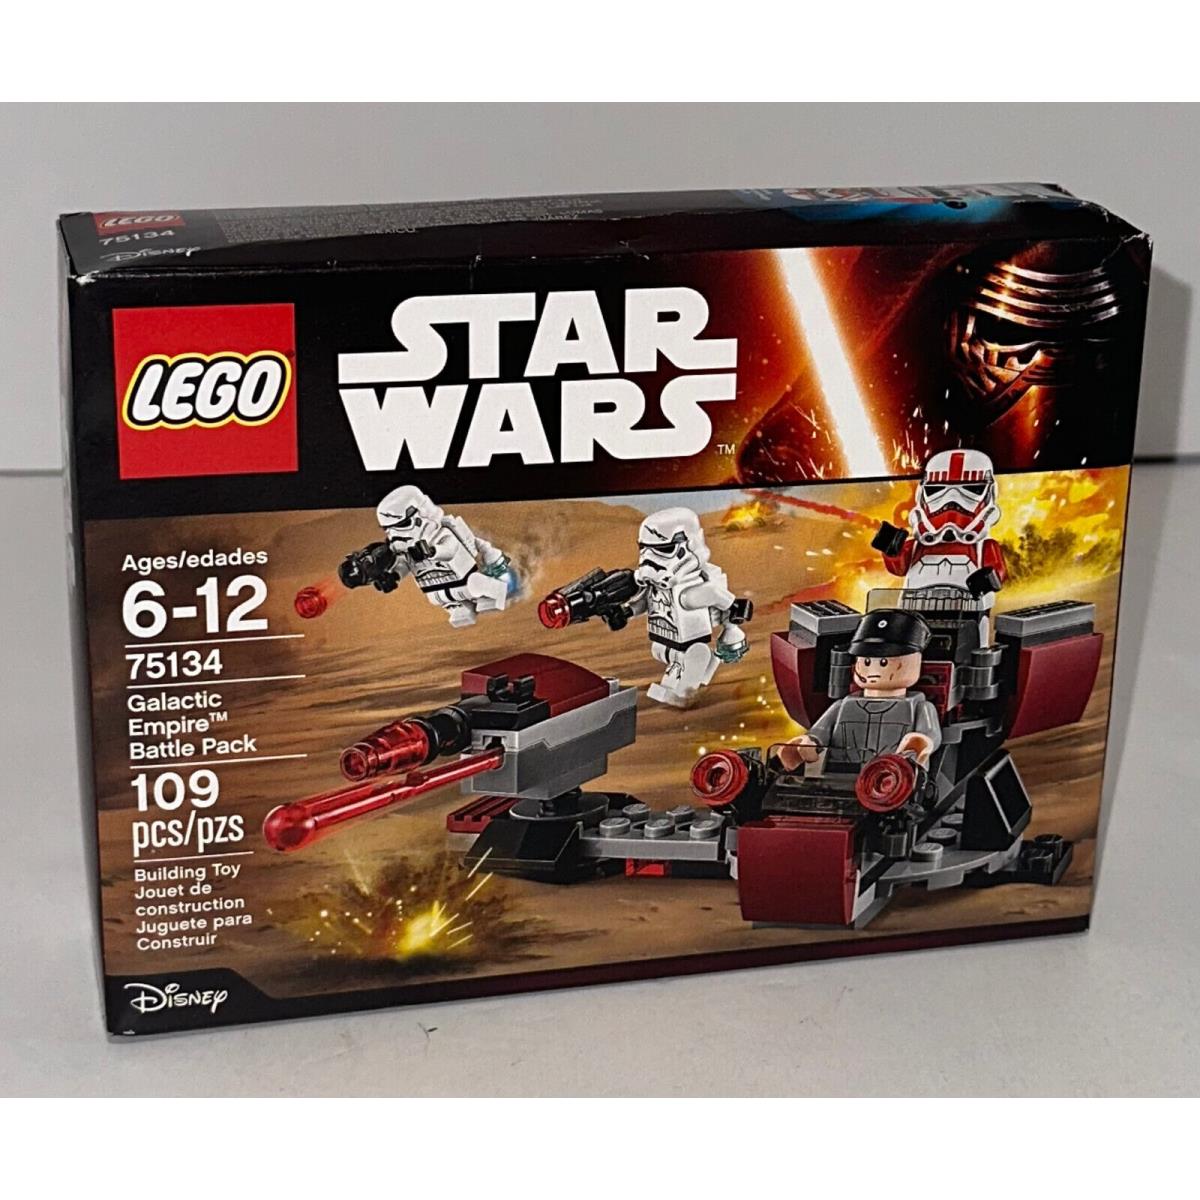 Lego Star Wars Galactic Empire Battle Pack 75134 Retired